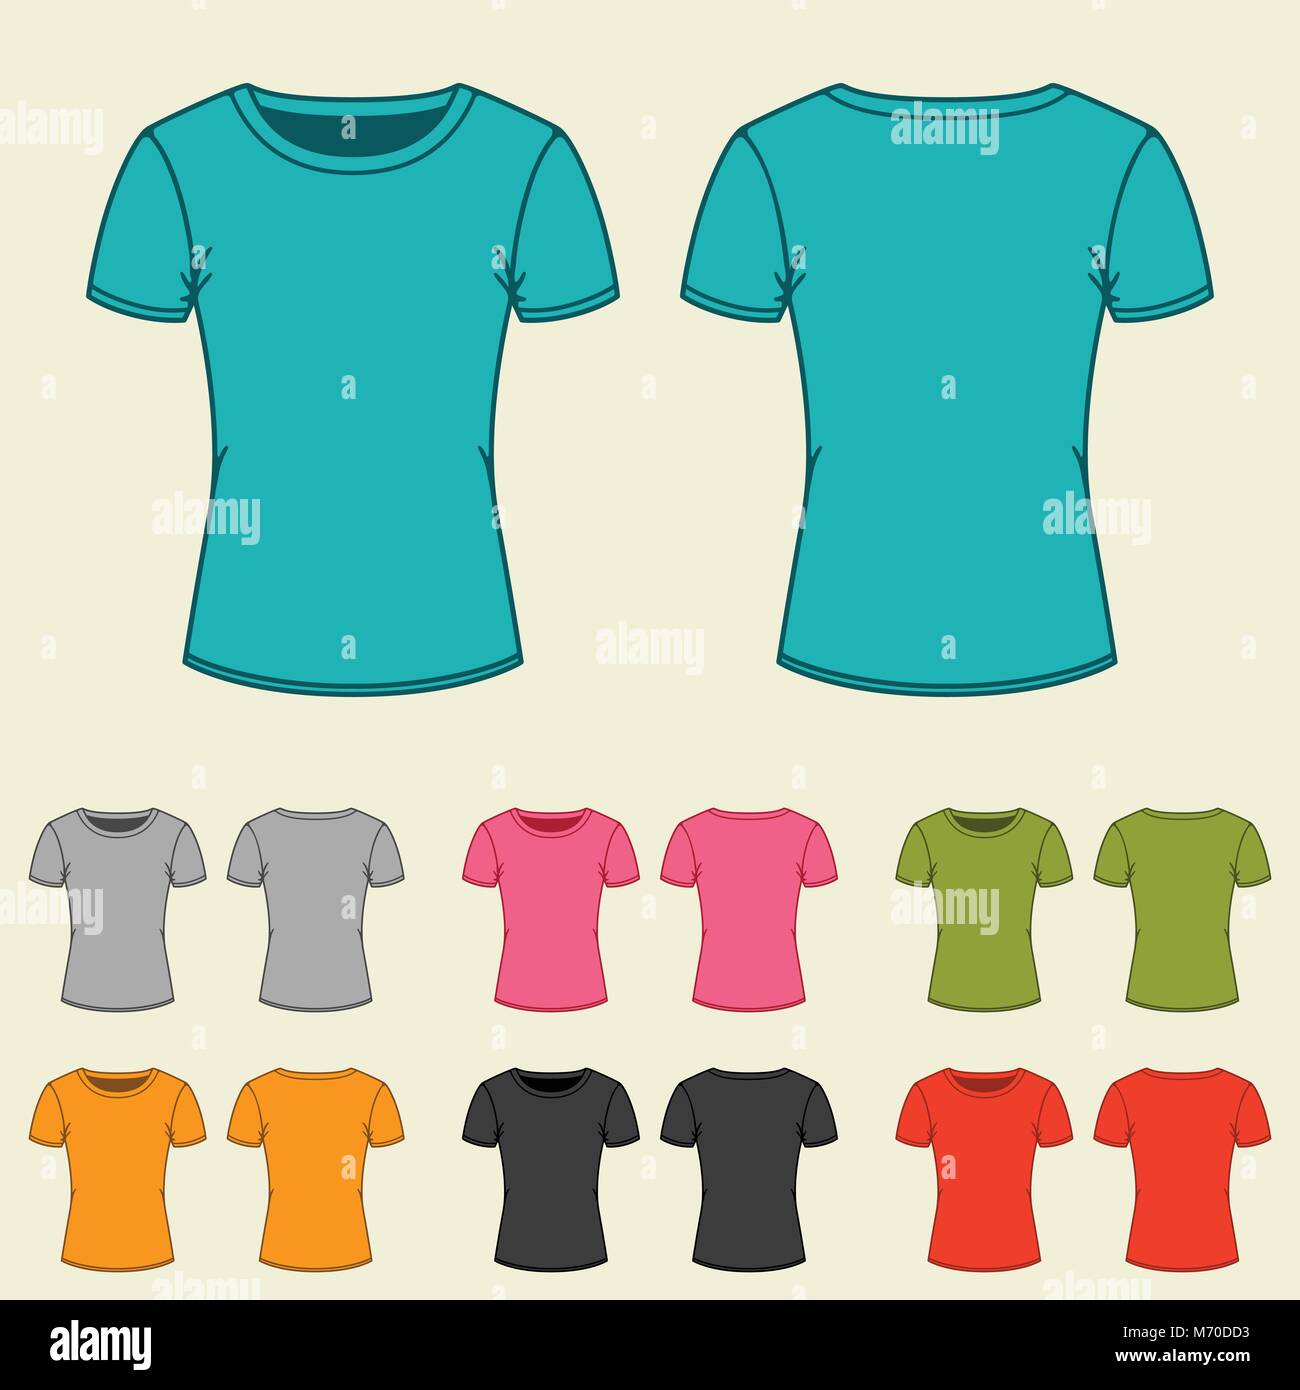 Market t shirts Stock Vector Images - Alamy